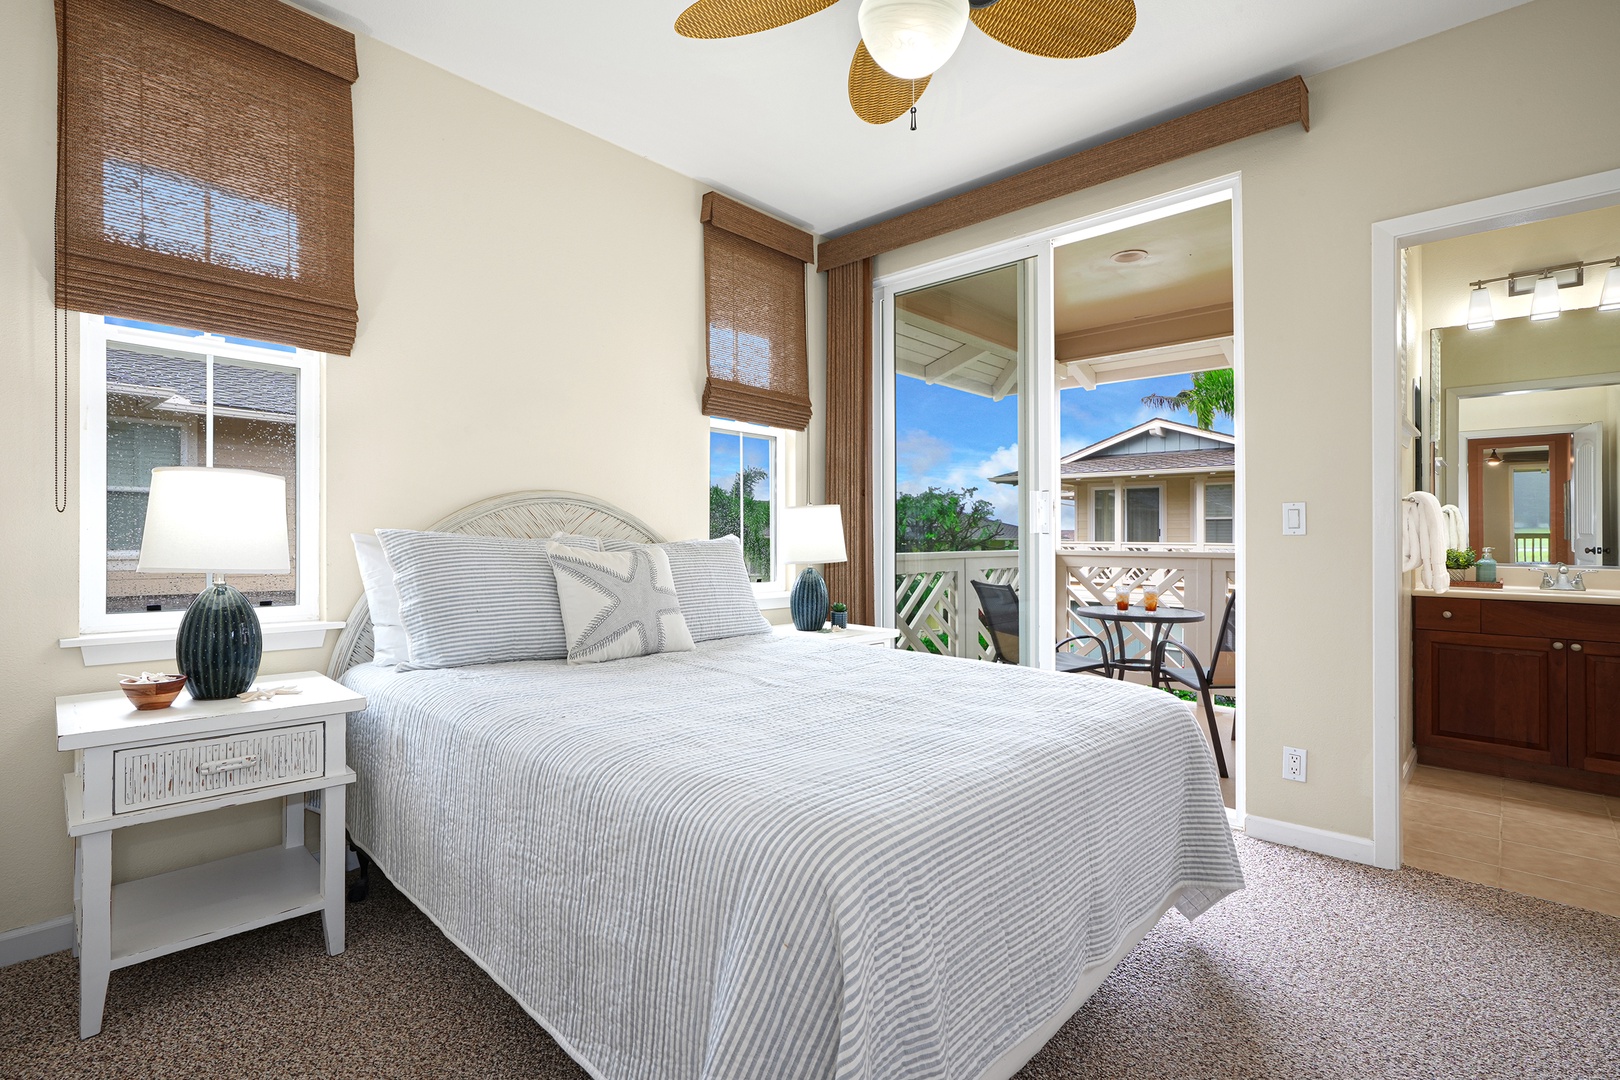 Princeville Vacation Rentals, Casa Makara - Wake up with scenic views from the guest bedroom with private lanai.